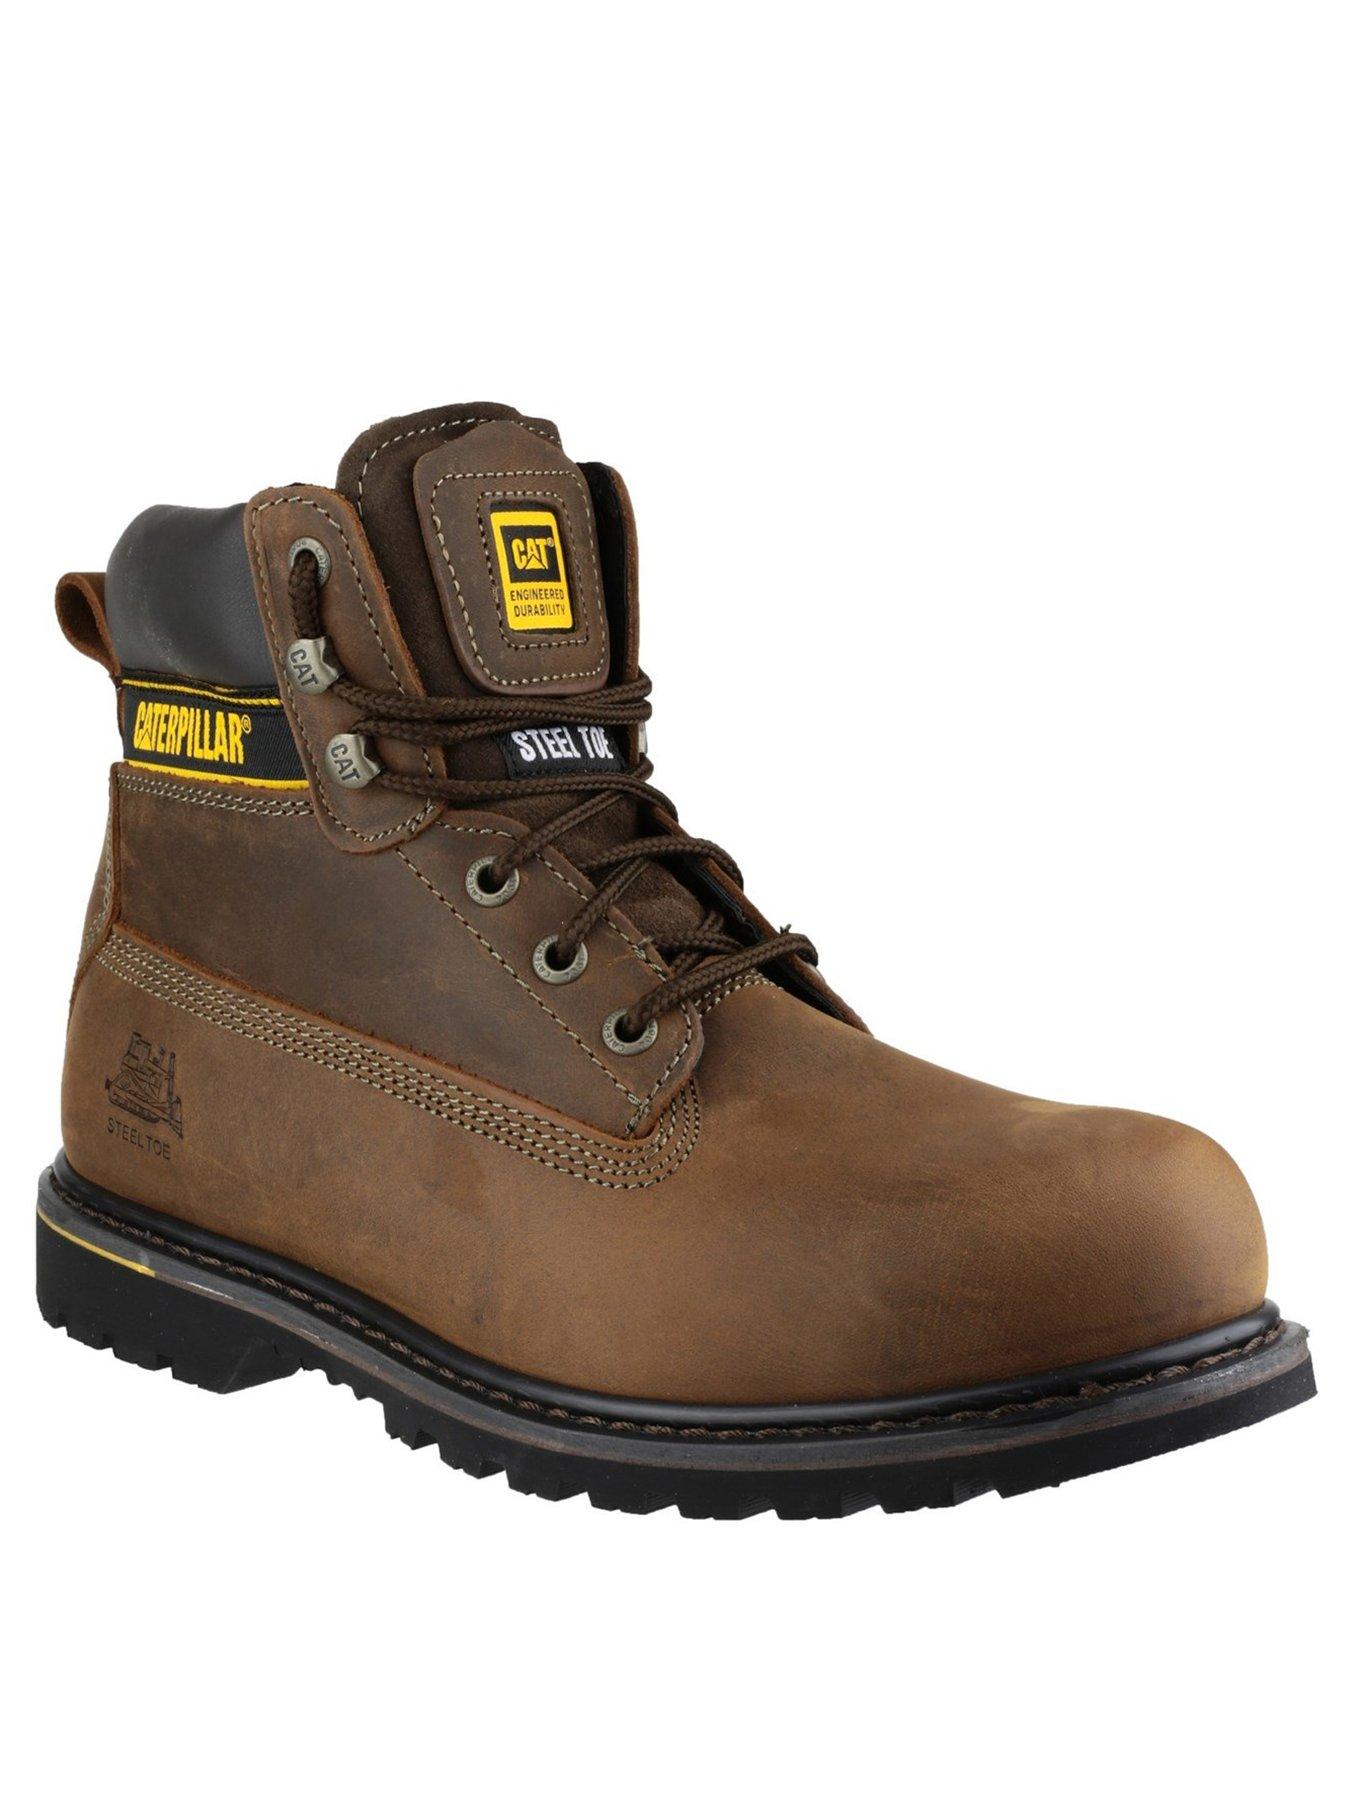  Holton Safety Boots - Brown